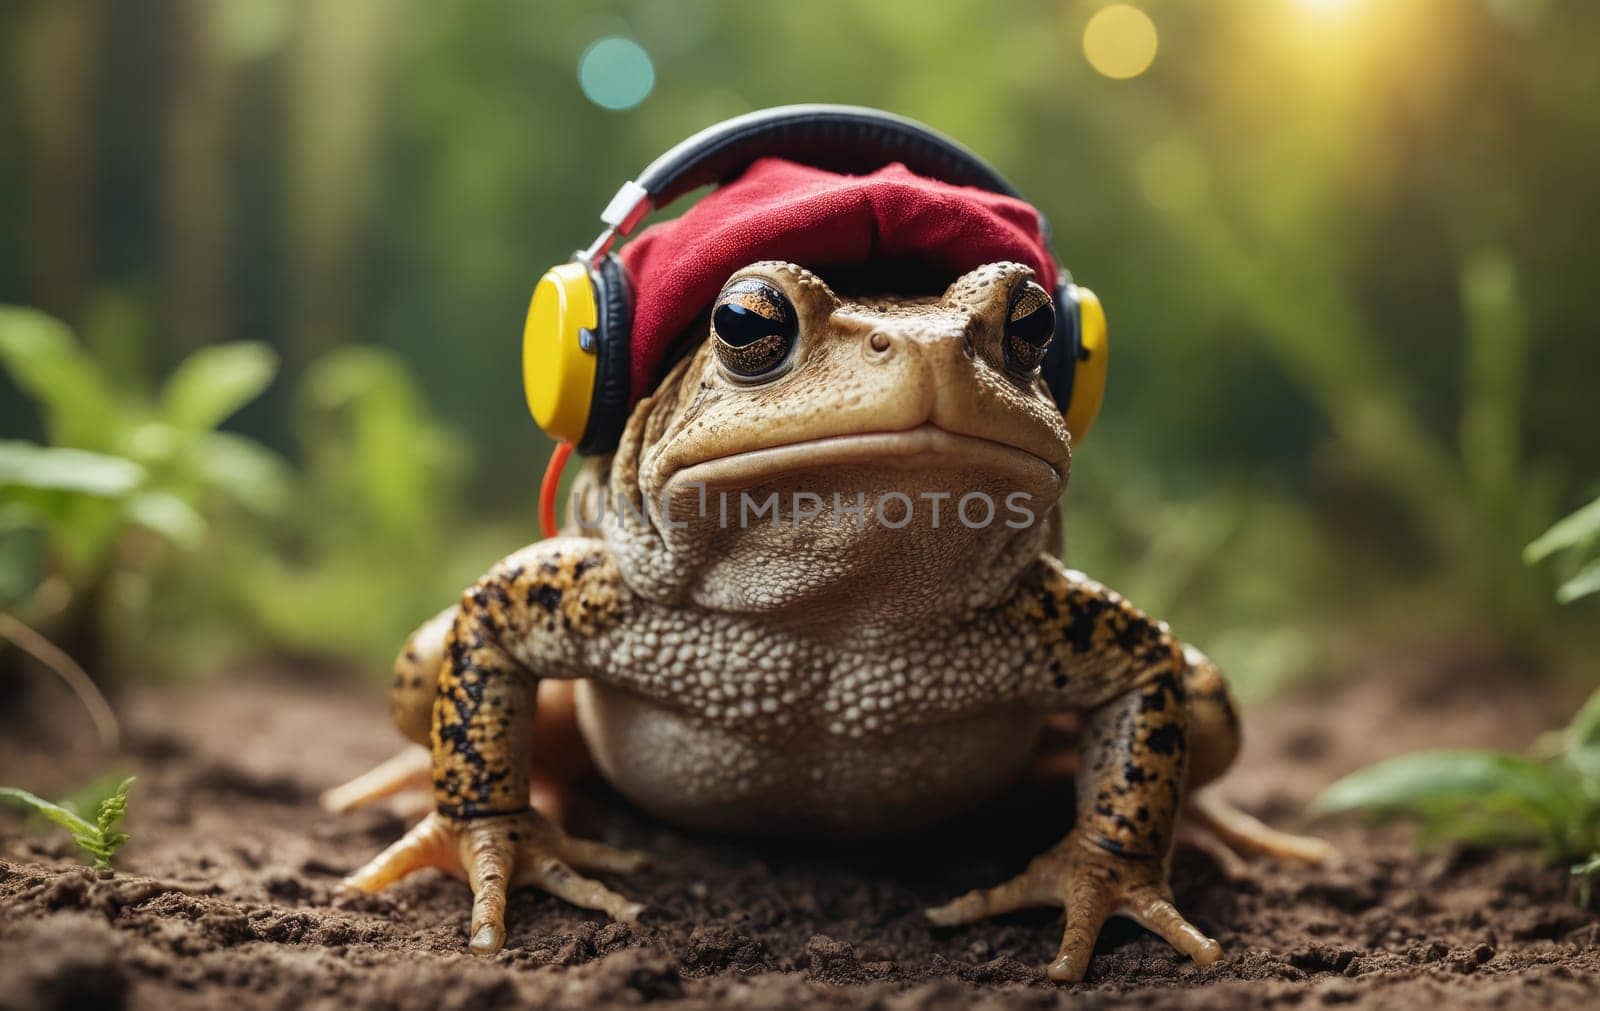 A terrestrial animal, amphibian frog, wearing headphones and a hat, is sitting on the ground surrounded by grass. The macro photography captures its unique adaptation in its natural habitat